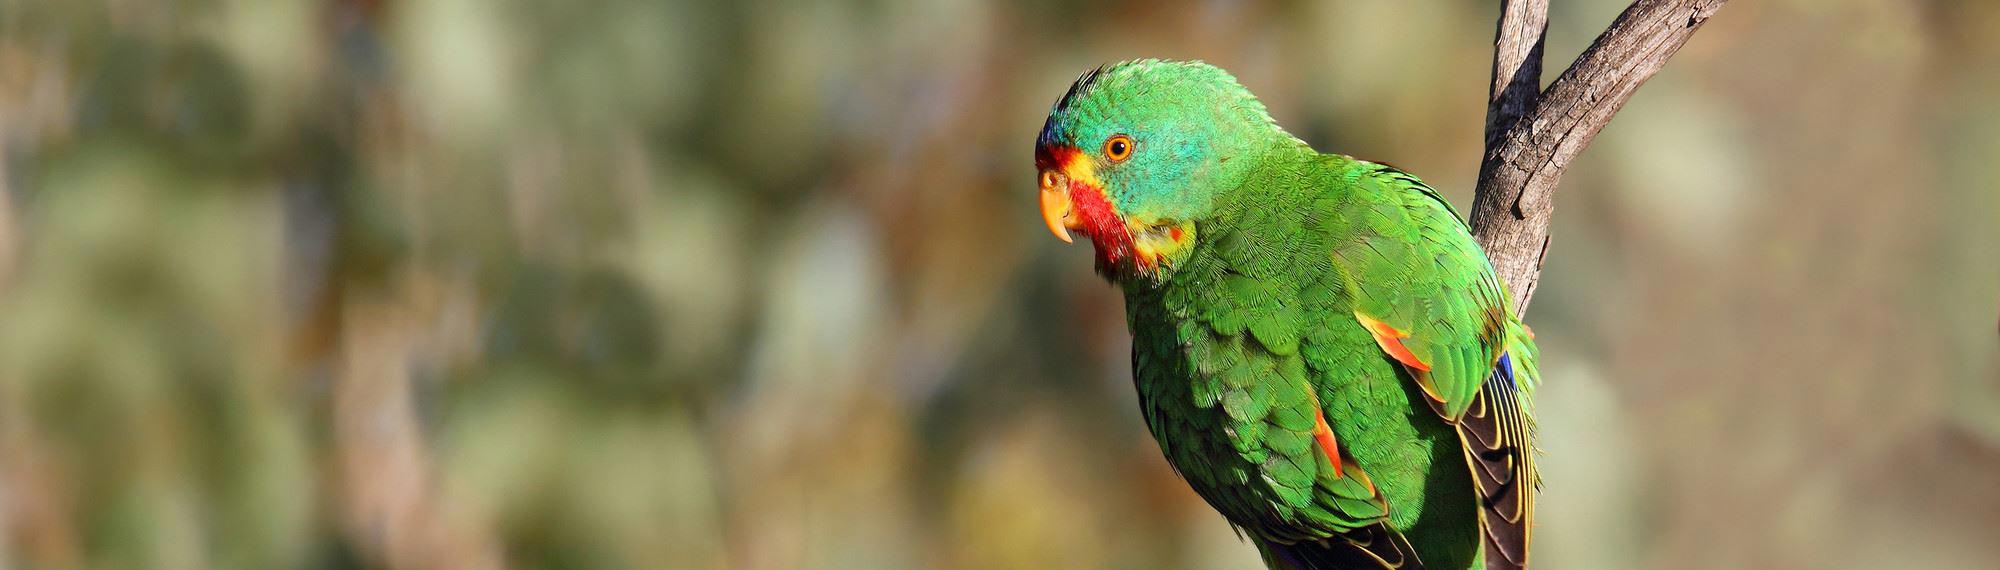 A Swift Parrot perched on a branch looking sideways towards the camera; parrot is mostly green with red and yellow on its face and wings.